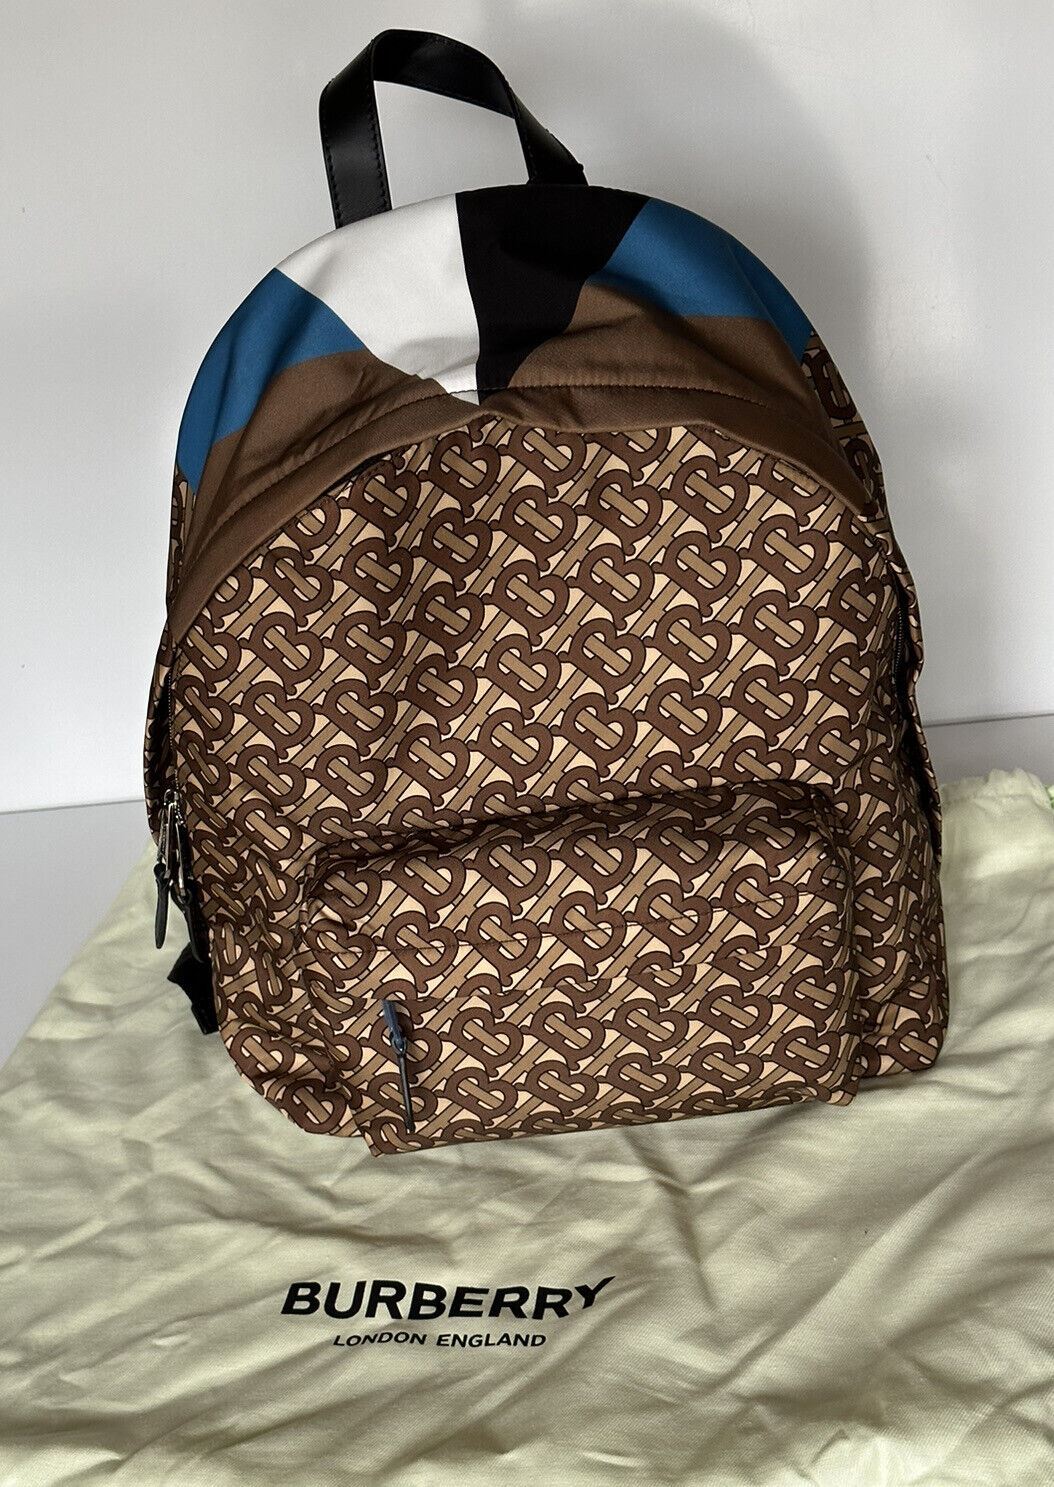 NWT Burberry Monogram Nylon Backpack Bridal Brown Made in Italy 80448241